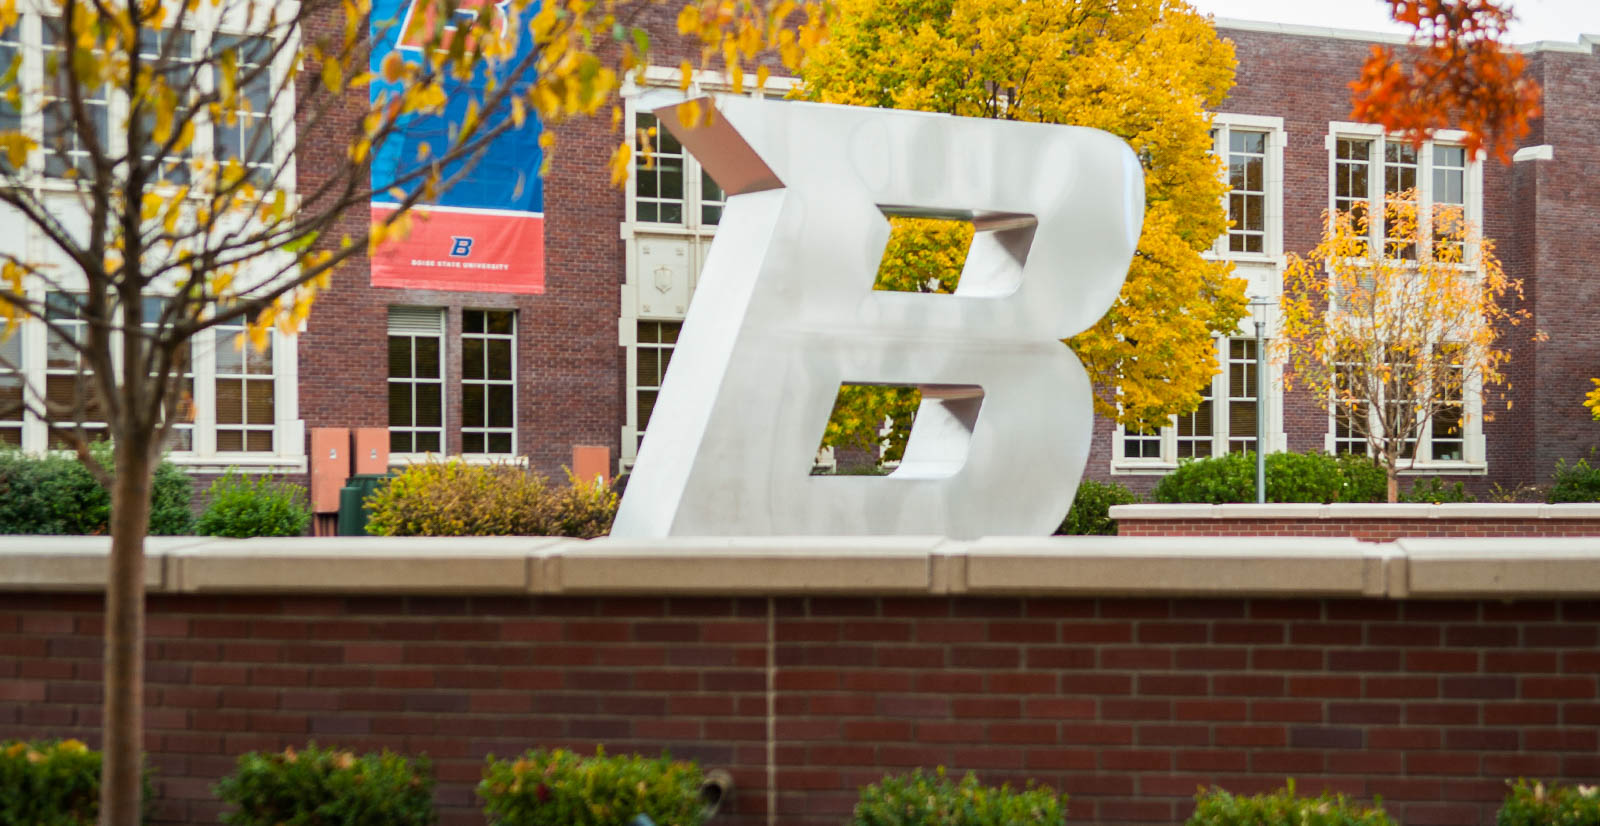 The B statue on Boise State's campus during Autumn 